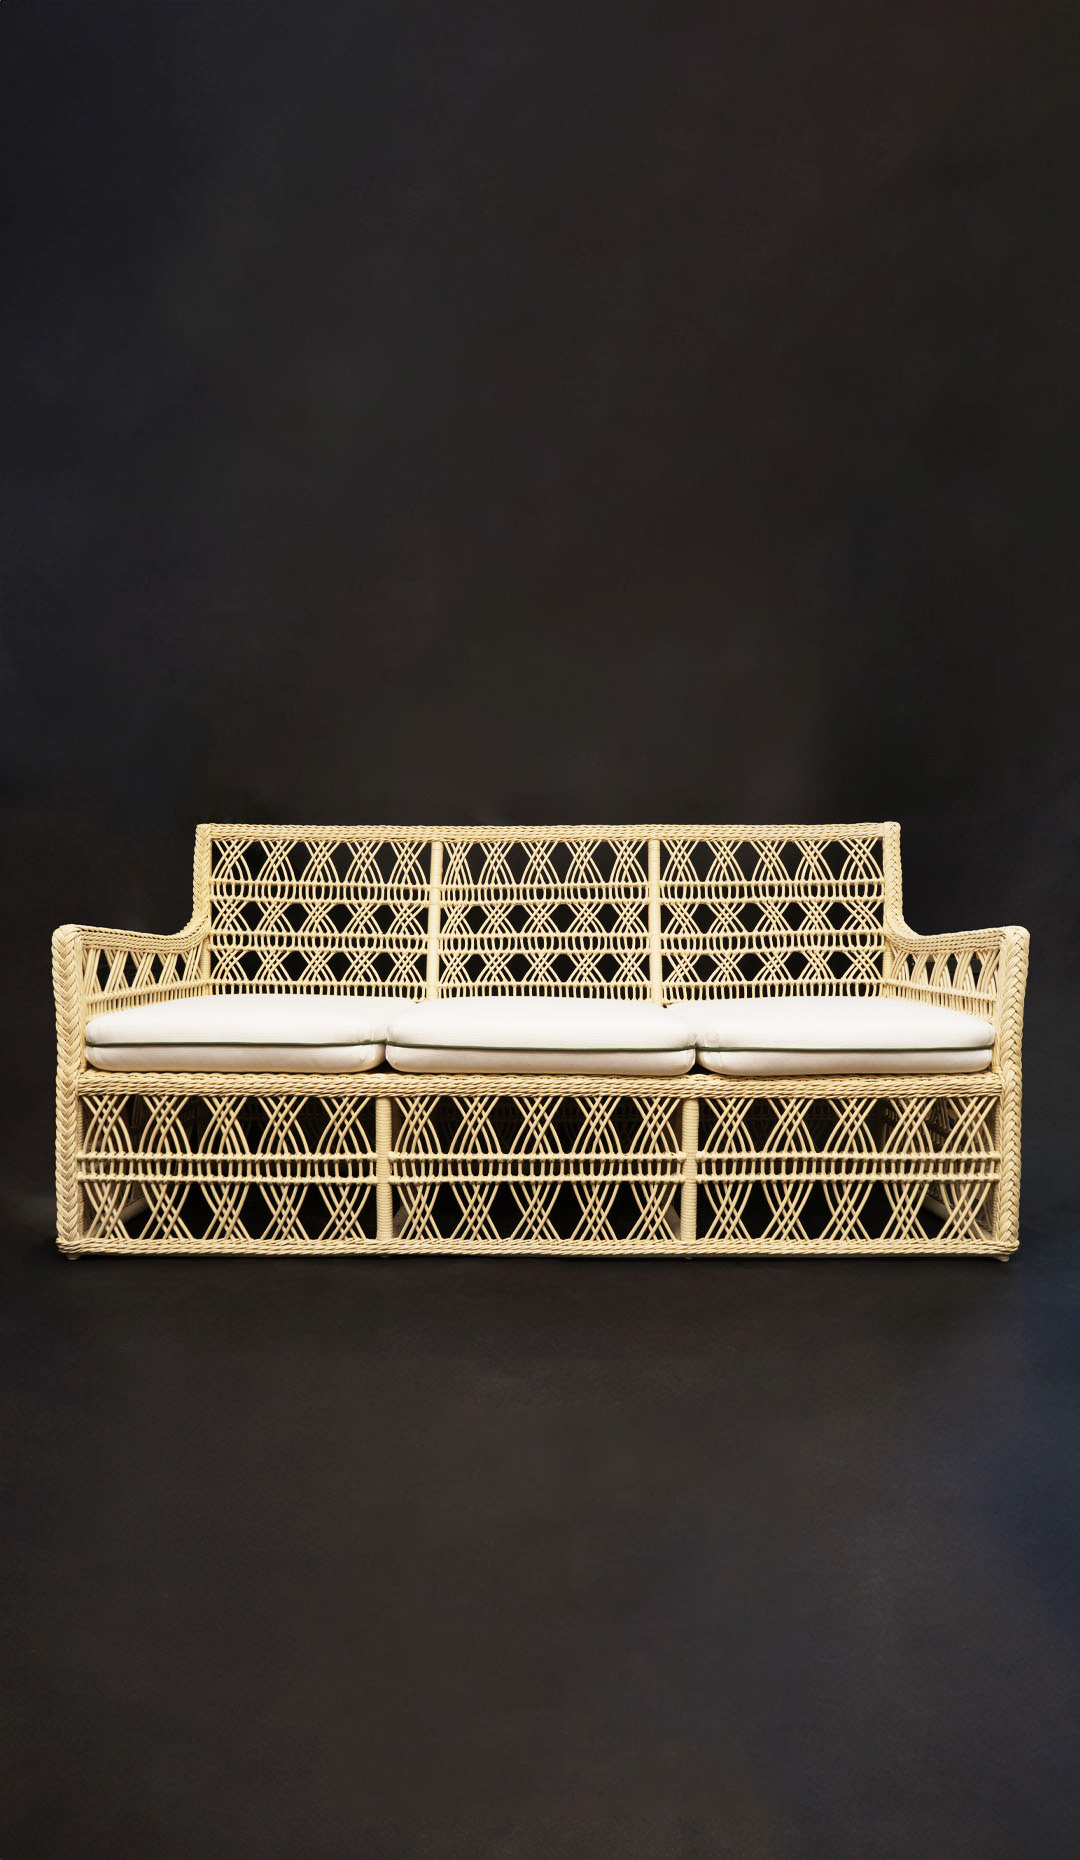 Rattan Trellis Sofa by Creel and Gow